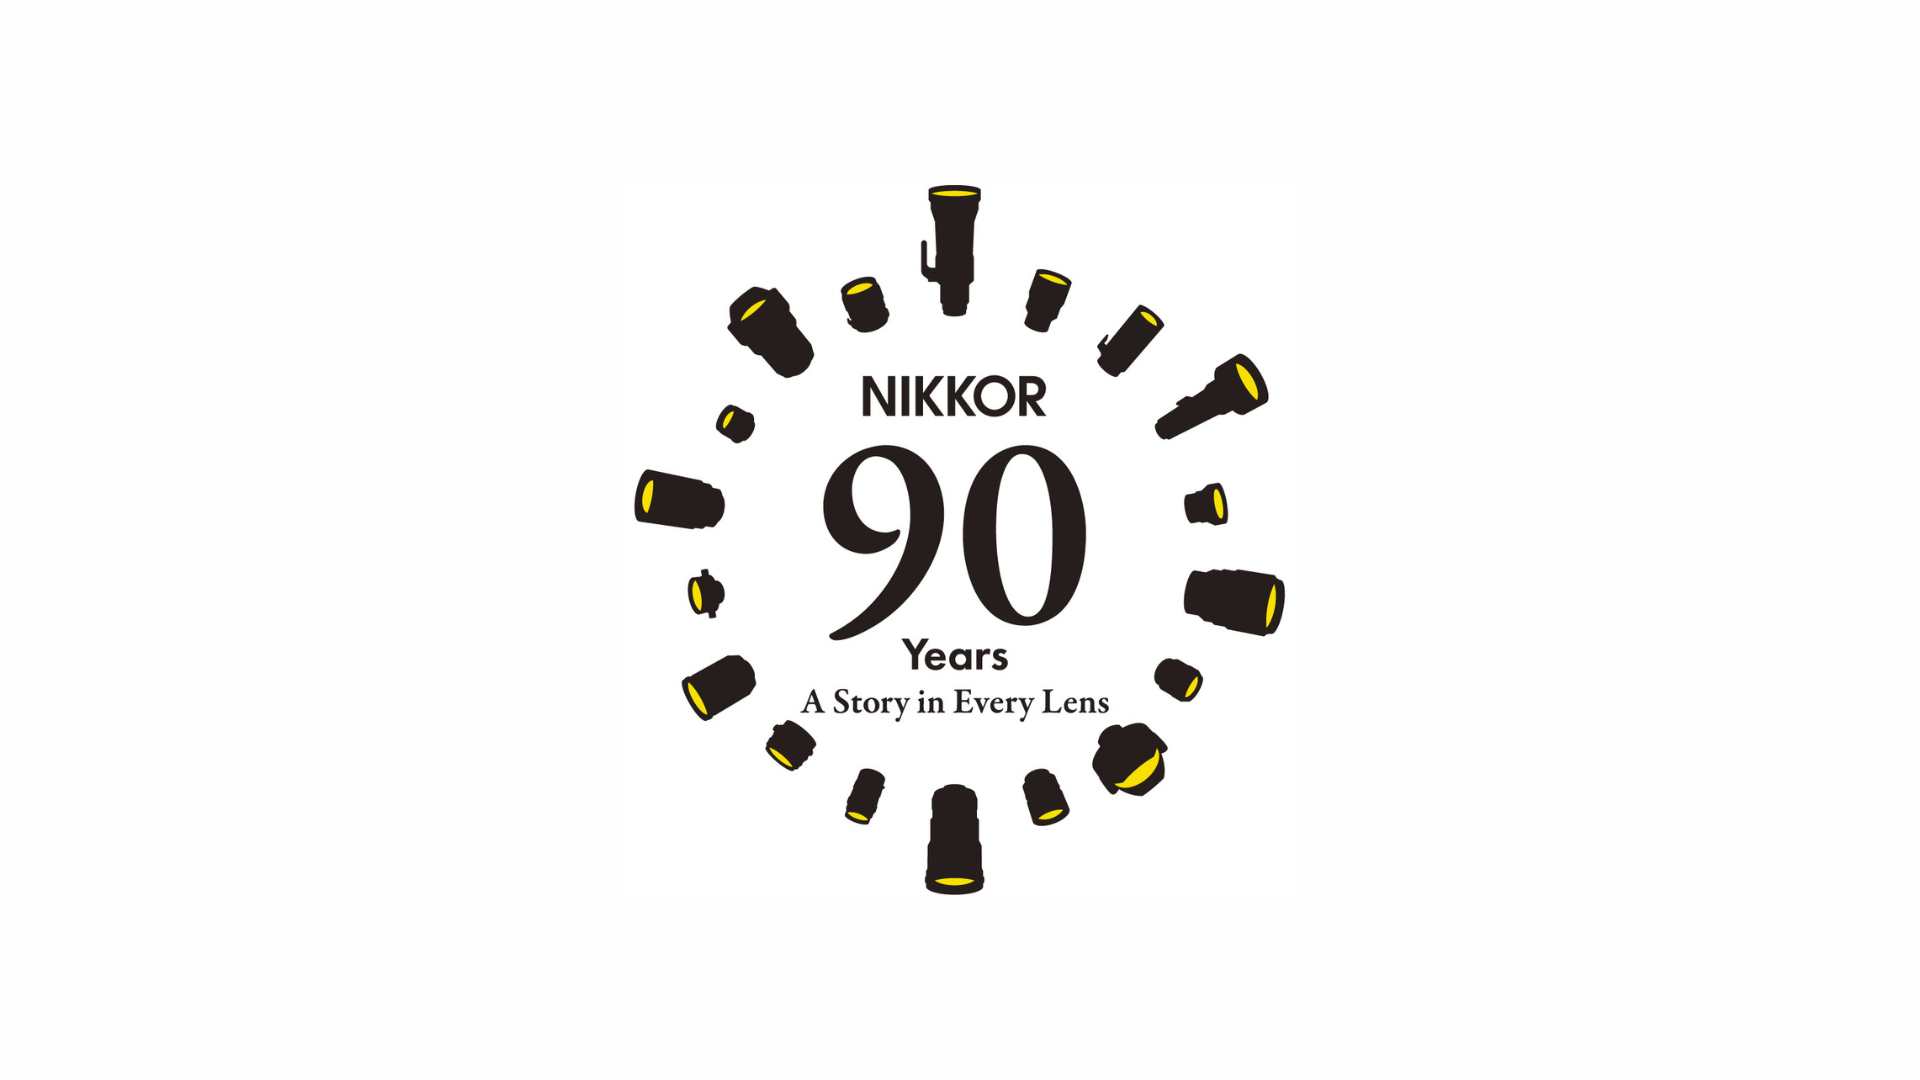 Celebrating 90 Years of NIKKOR Excellence